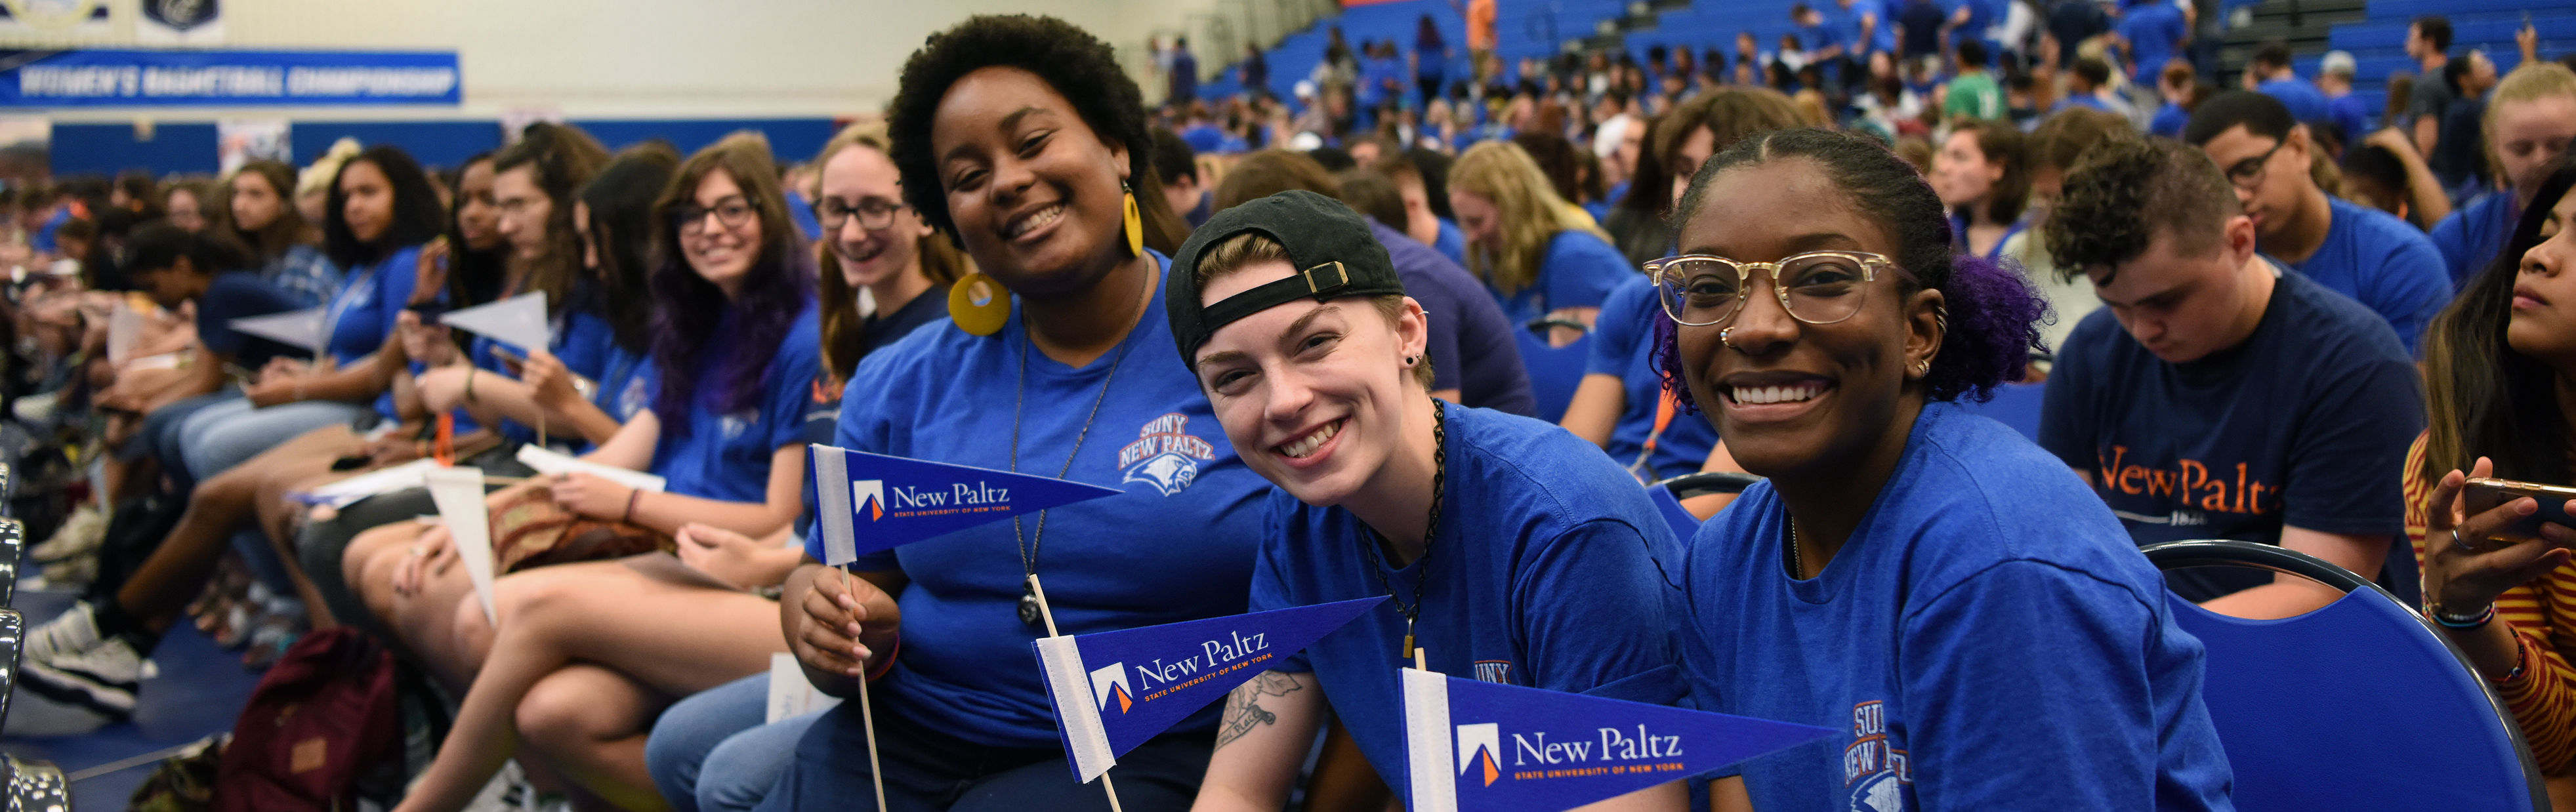 students smiling while attending 2019 Convocation